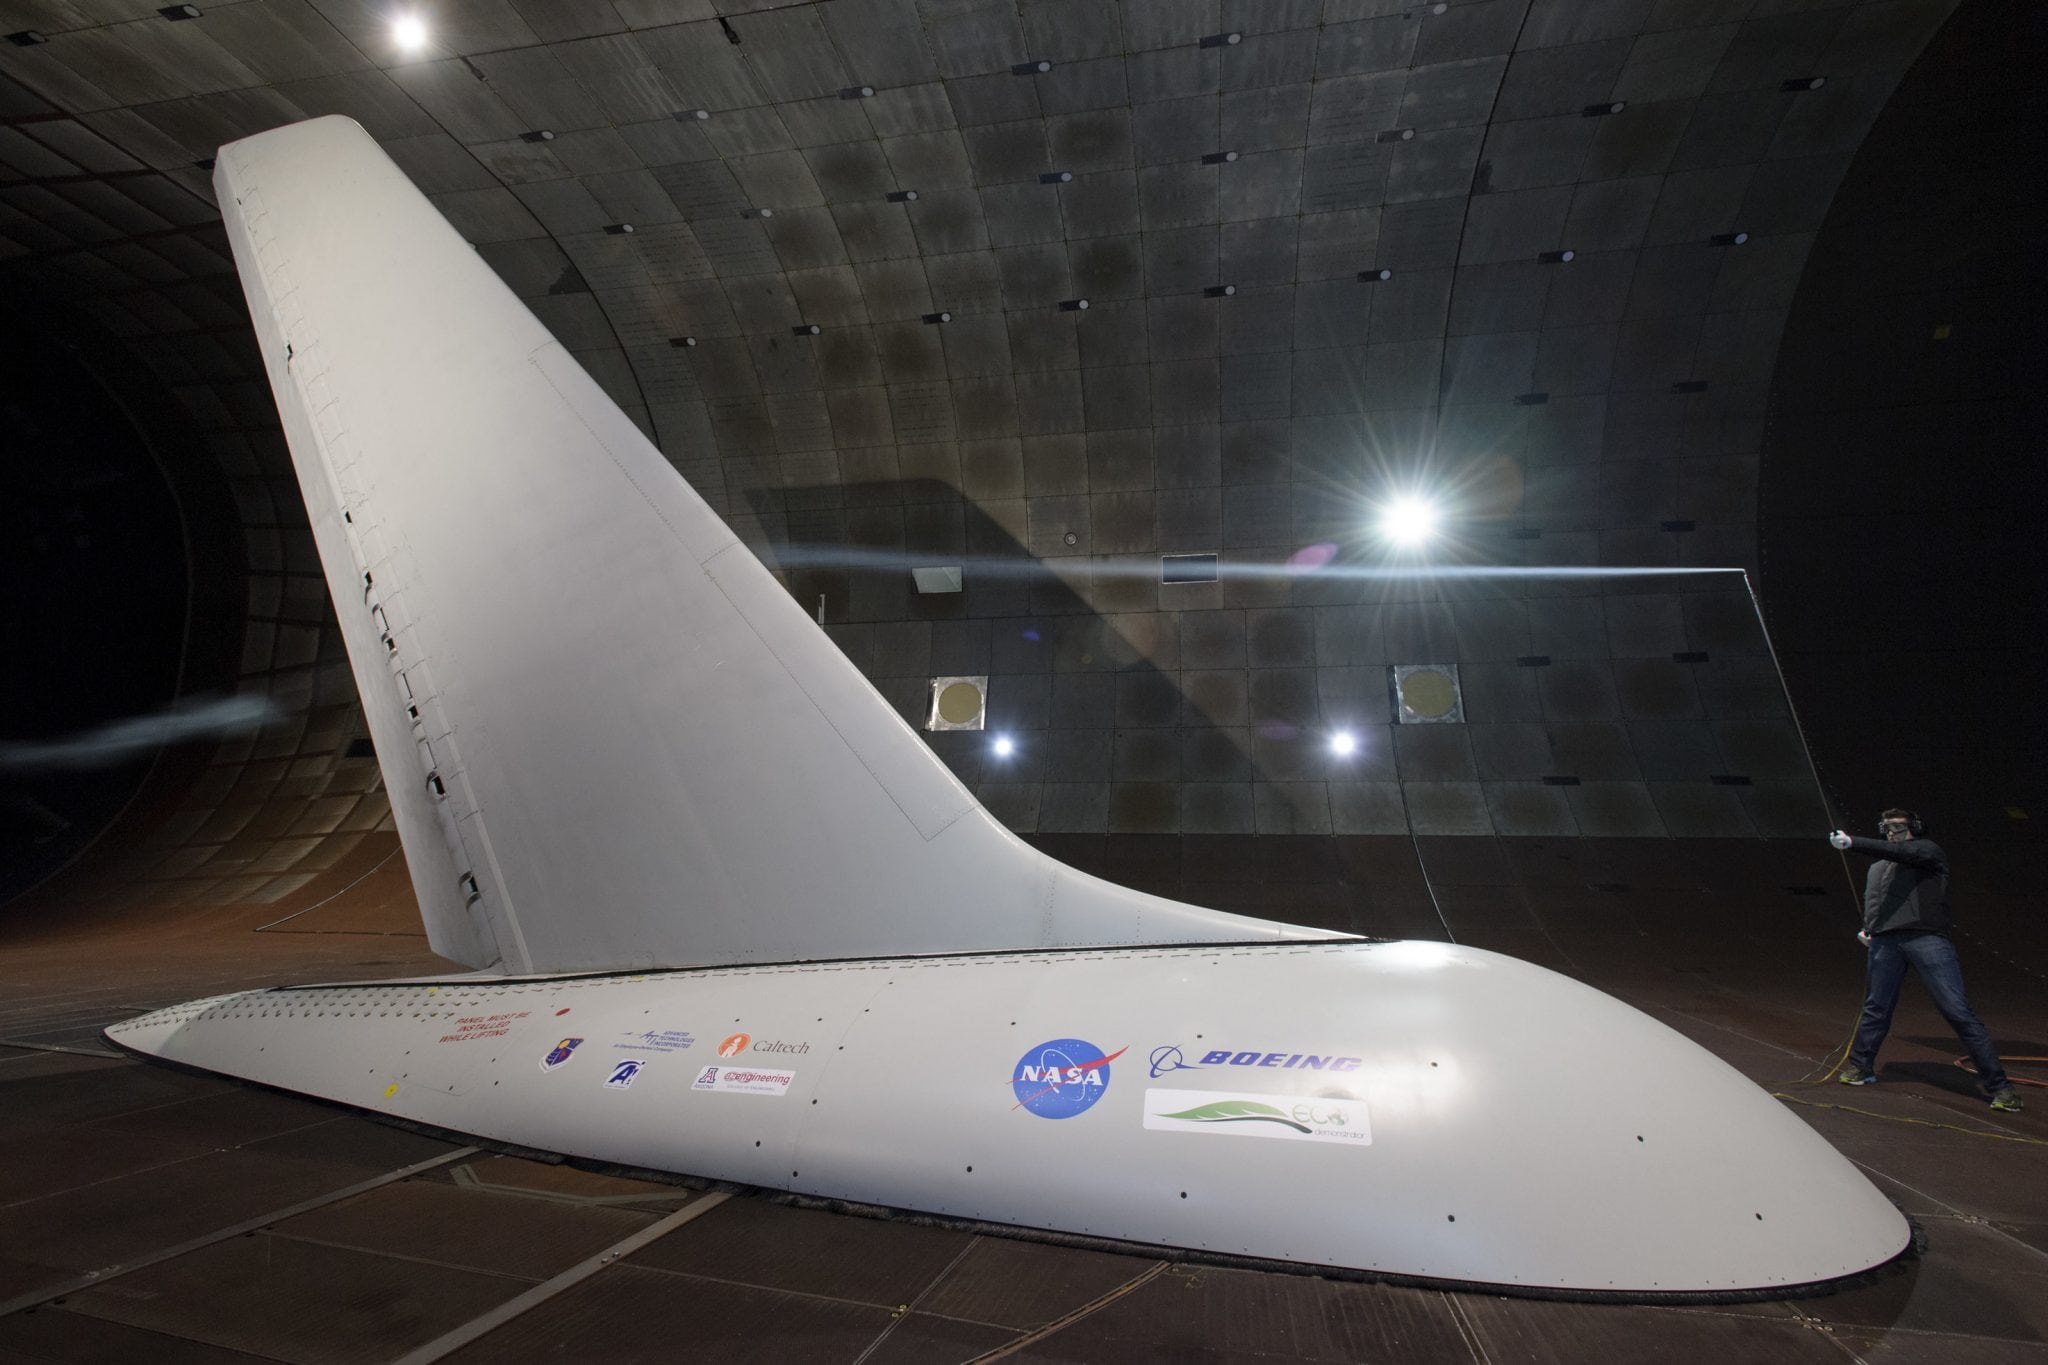 Researchers with NASA's Environmentally Responsible Aviation project coordinated wind-tunnel tests of an Active Flow Control system — tiny jets installed on a full-size aircraft vertical tail that blow air — to prove they would provide enough side force and stability that it might someday be possible to design smaller vertical tails that would reduce drag and save fuel